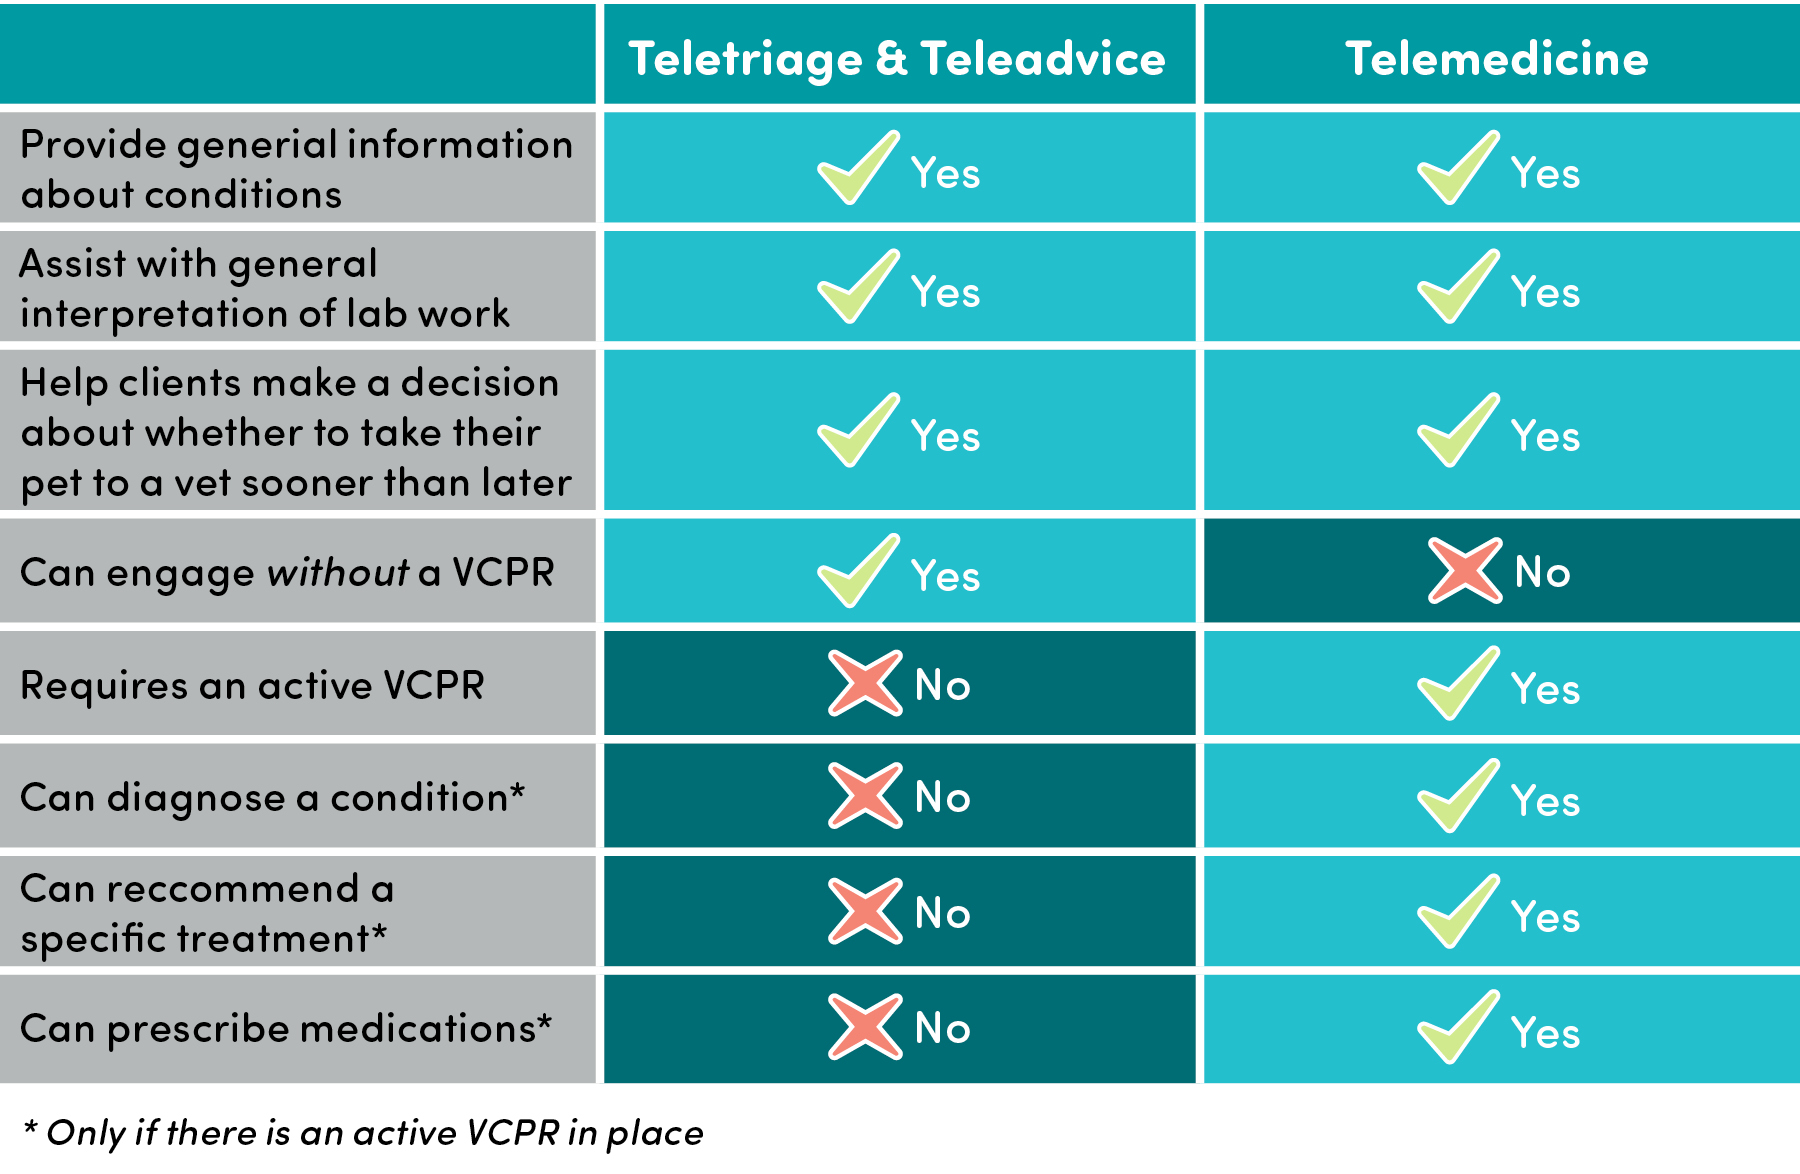 Grid chart showing which veterinary functions can be provided by Teletriage & TeleAdvice and Telemedicine